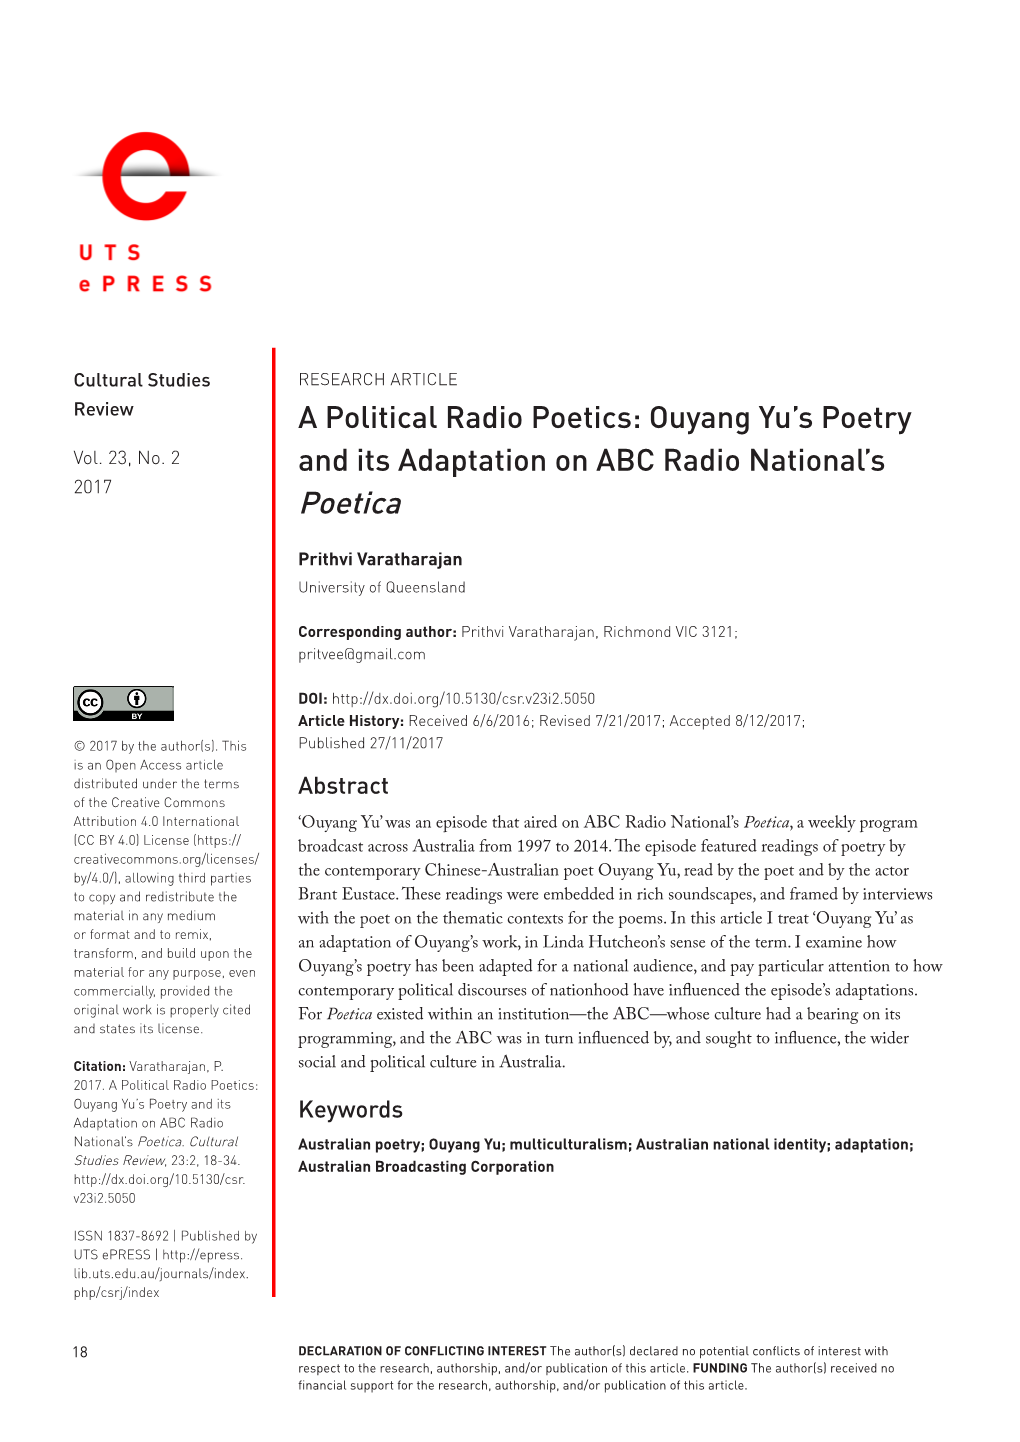 A Political Radio Poetics: Ouyang Yu's Poetry and Its Adaptation on ABC Radio National's Poetica